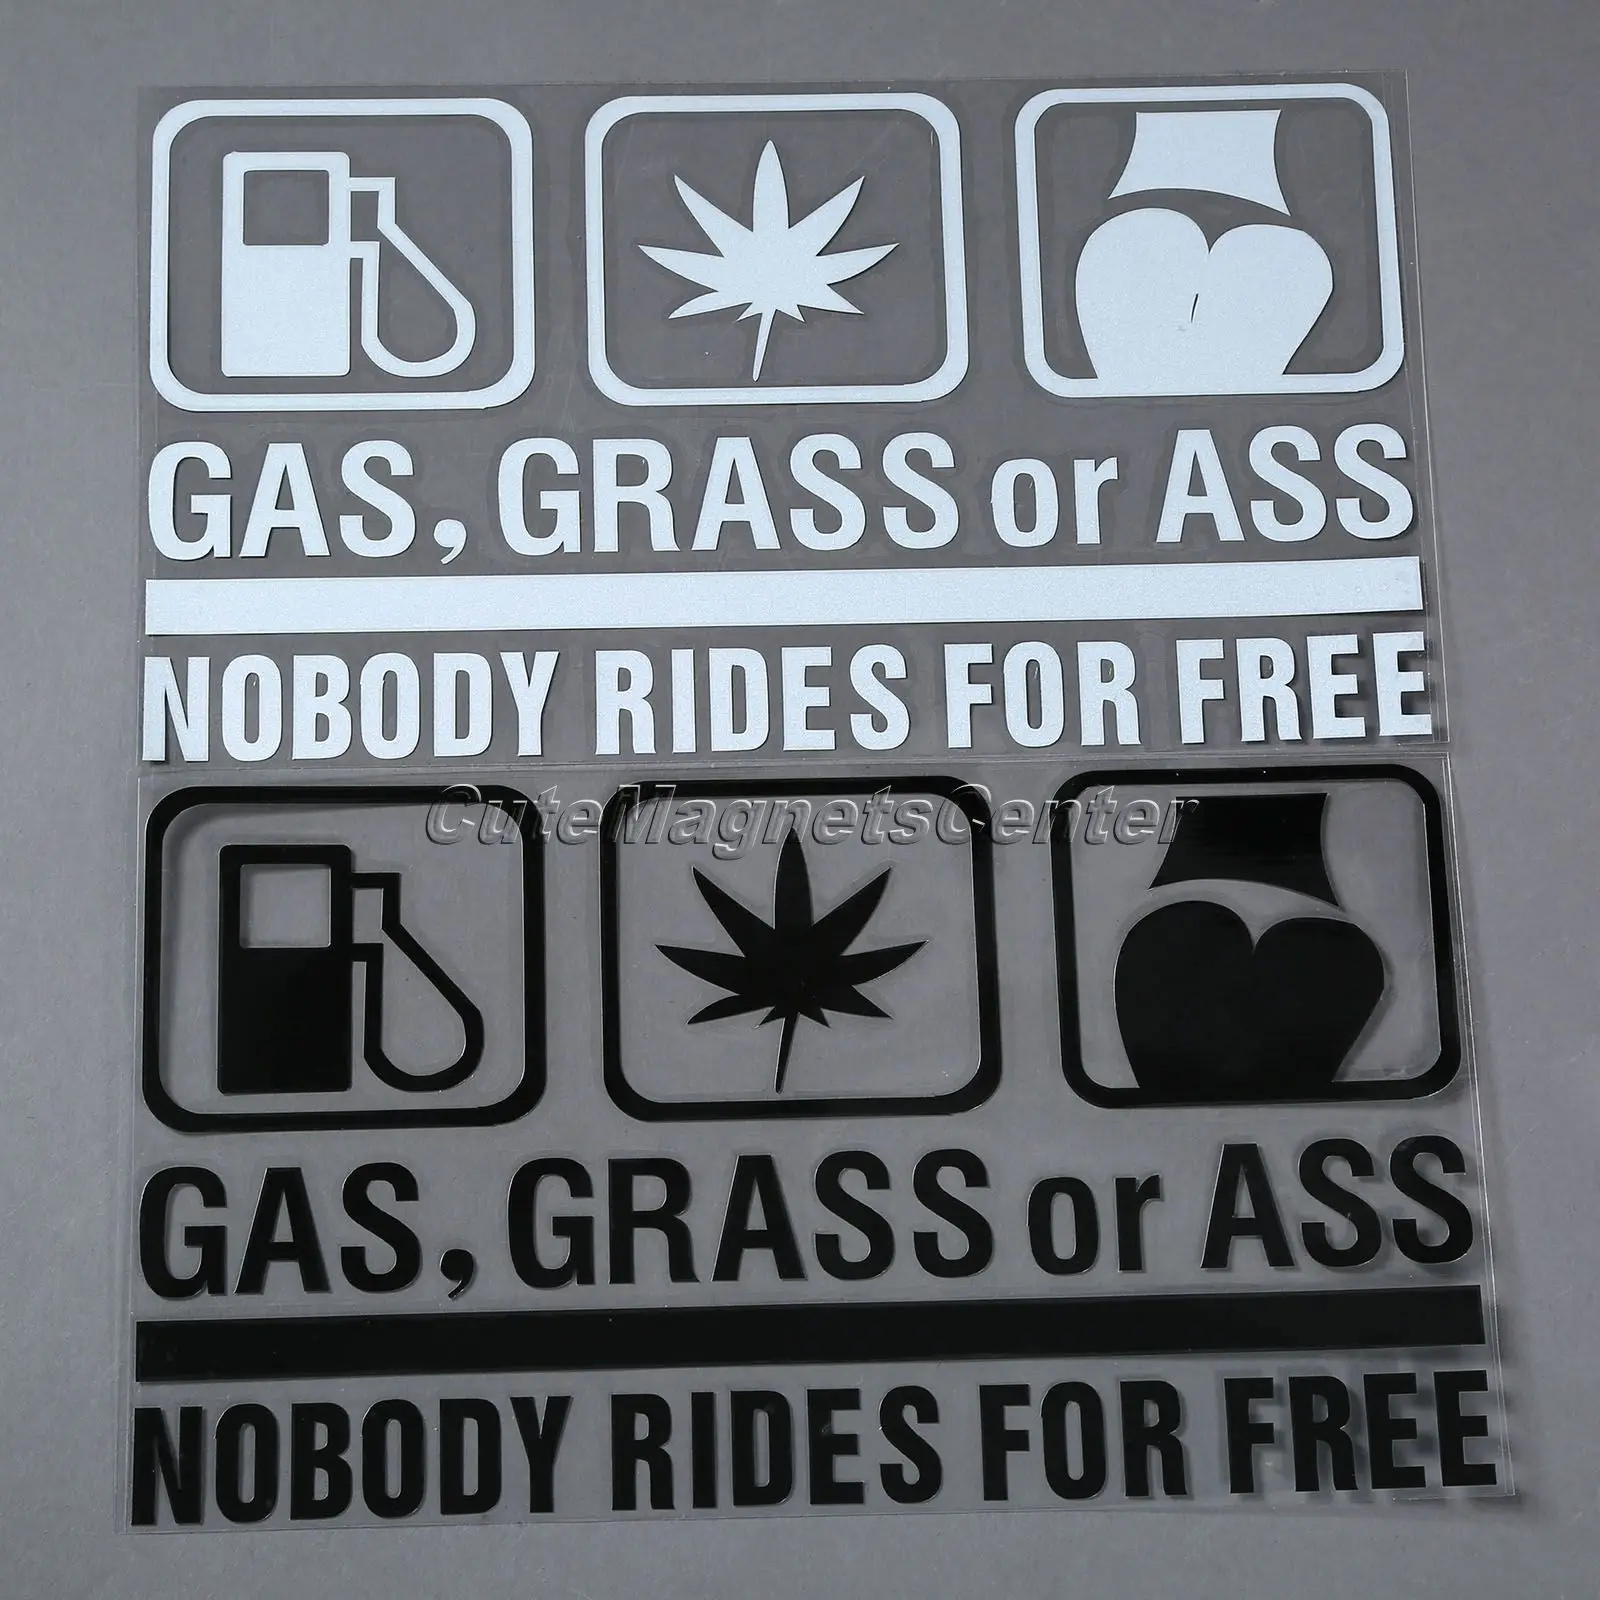 1Pc New Car Sticker White / Black GAS GRASS OR ASS NOBODY RIDES FOR FREE Reflective Decals on Car Styling Stickers Auto KTM Body